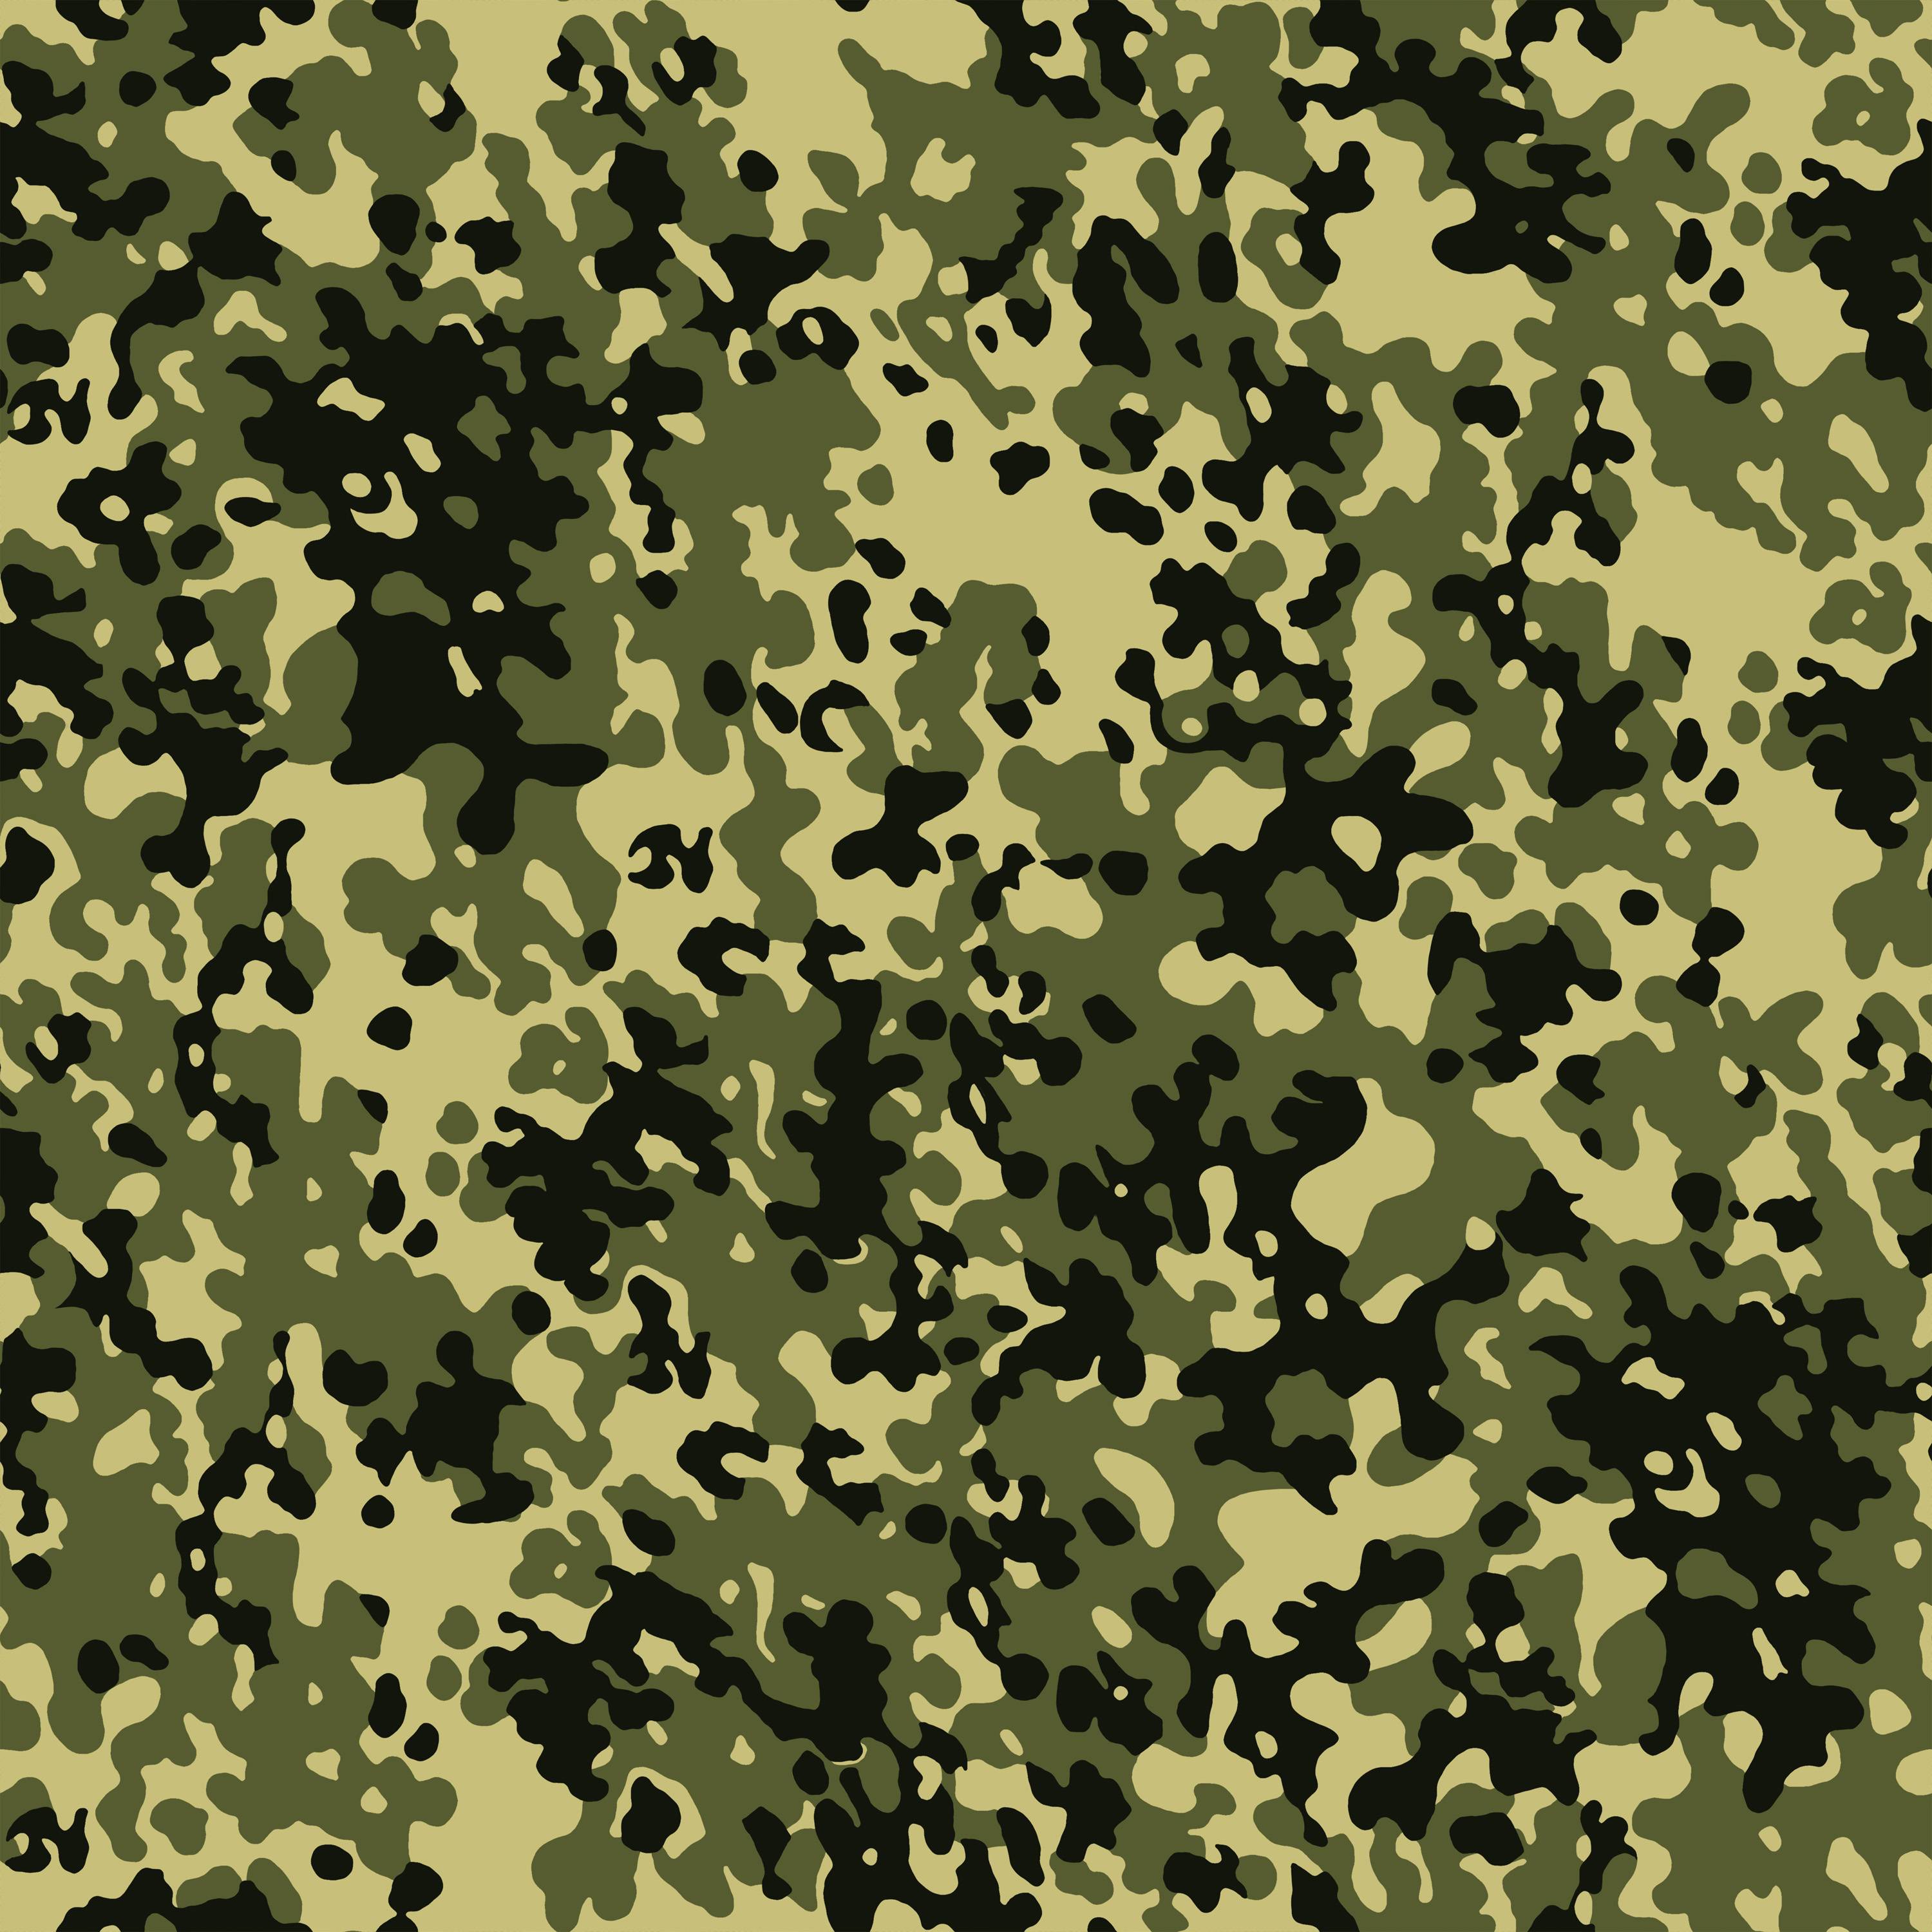 Camouflage Background Gallery. by Textures8.com